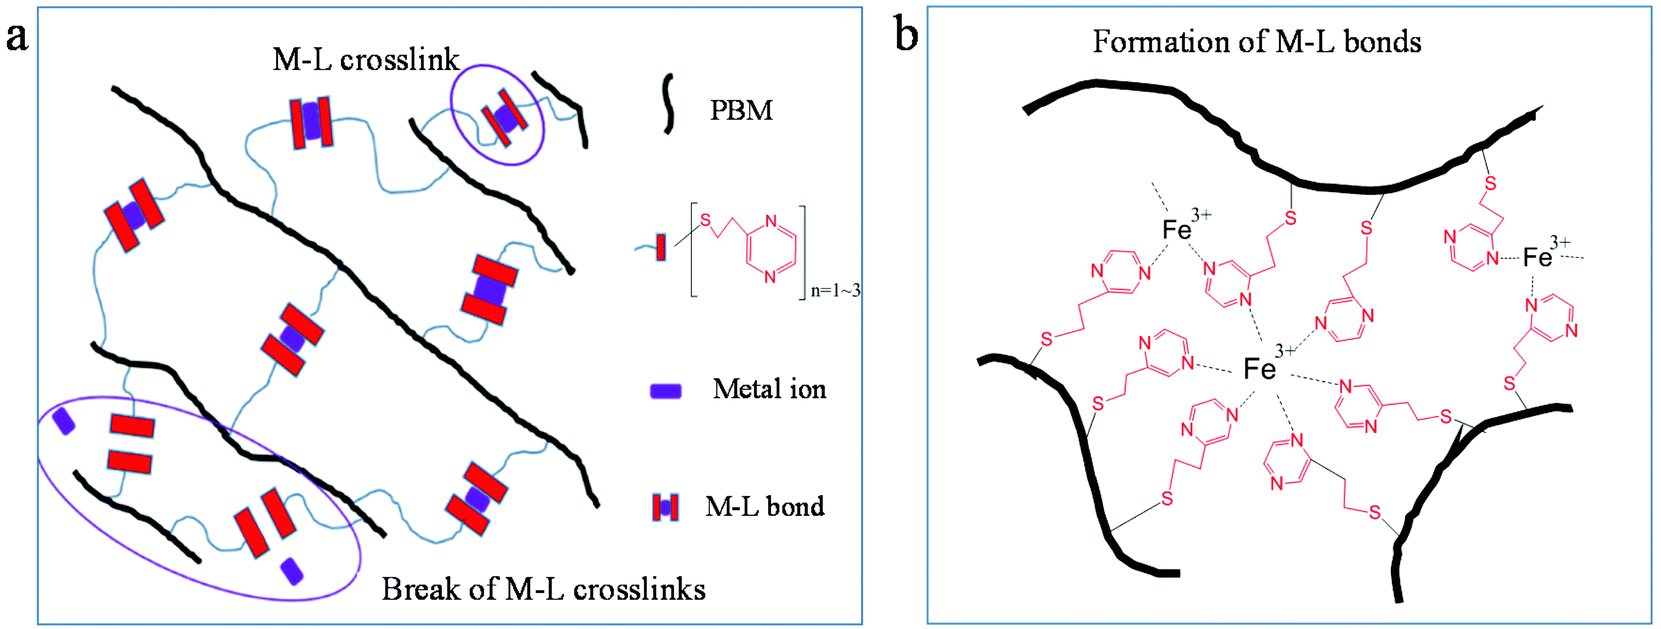 Highly Stretchable And Strong Poly Butylene Maleate Elastomers Via Metal Ligand Interactions Polymer Chemistry Rsc Publishing